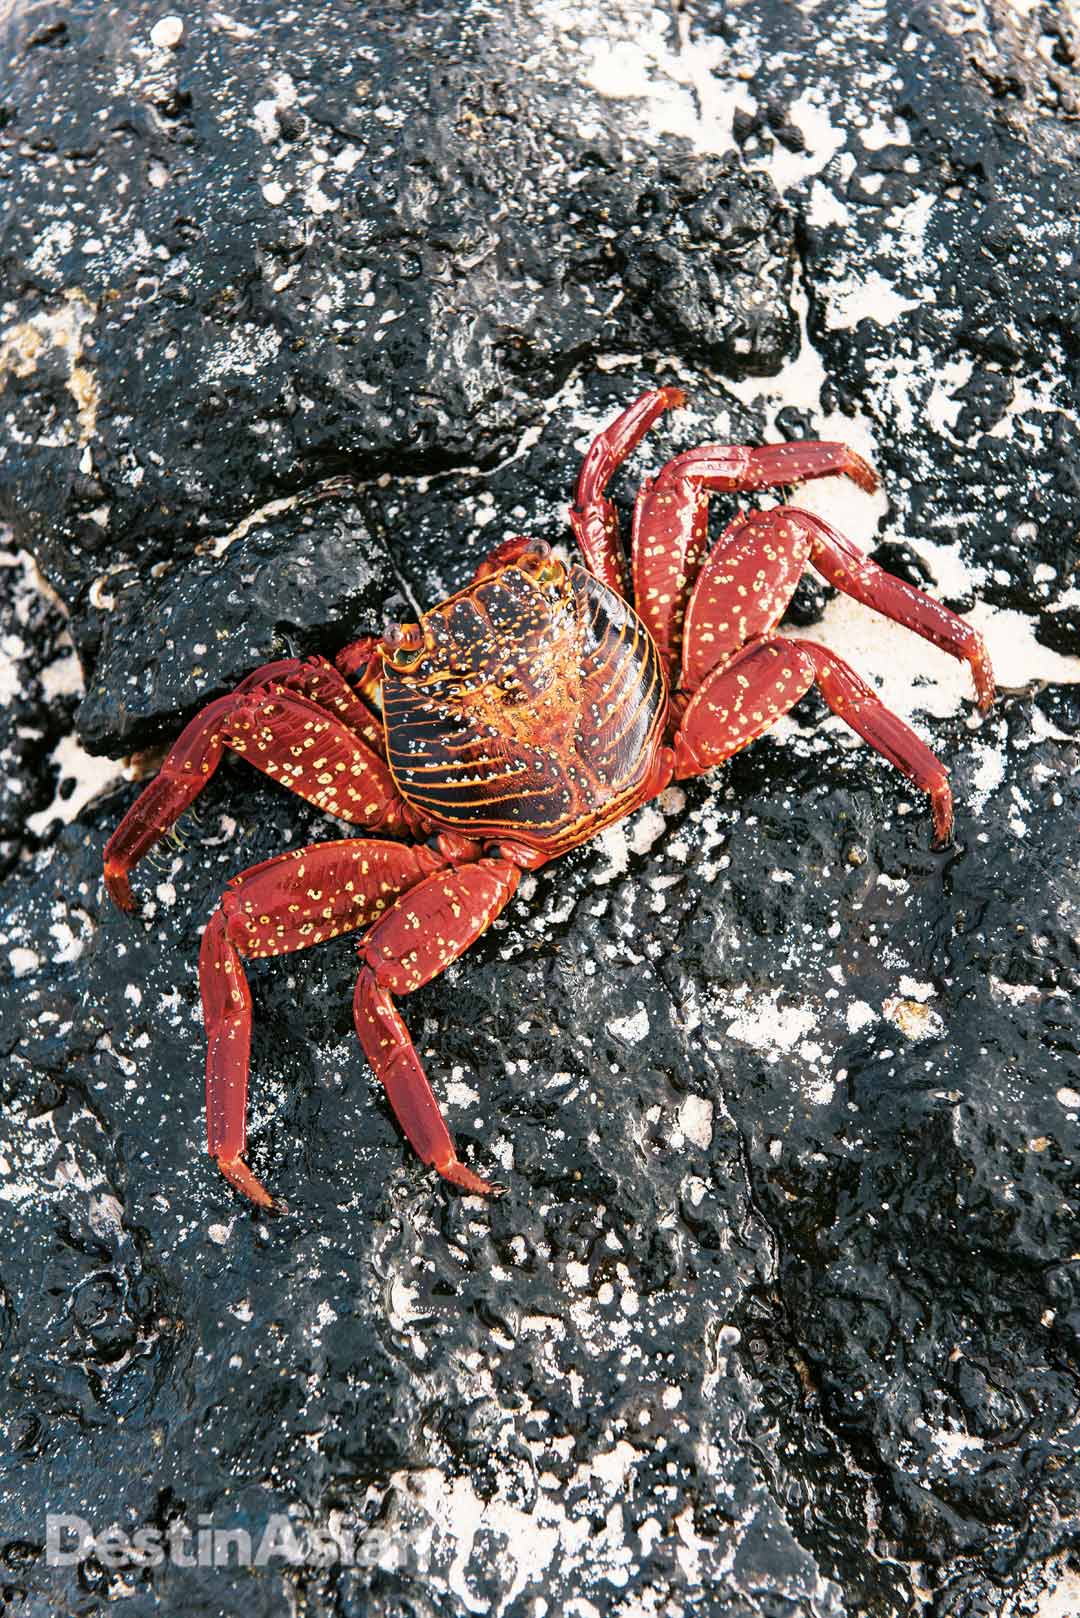 A Sally Lightfoot crab clinging to lava rock on the shores of San Cristóbal.